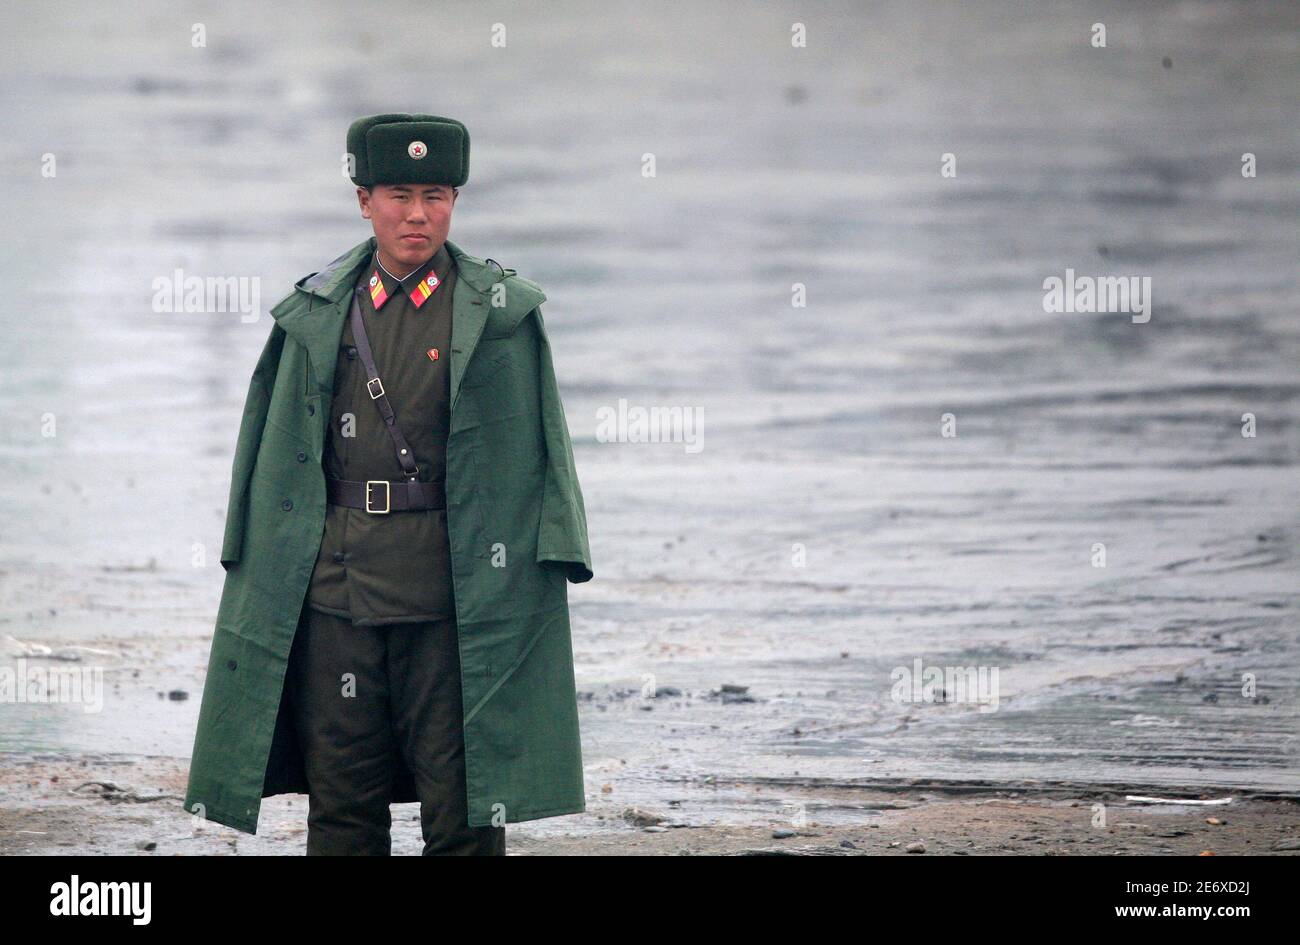 A North Korean soldier guards the banks of the Yalu River near the North Korean town of Sinuiju, opposite the Chinese border city of Dandong, March 31, 2010. North Korea warned on Monday of unpredictable disaster unless the South and the United States stop allowing tourists inside a heavily armed border buffer that is one of the most visited spots on the peninsula. The warning comes afters tensions rose when a South Korean navy ship sank on Friday. Early reports that the North may have been involved spooked markets but Seoul later said it was almost certain Pyongyang had played no part.  REUTE Stock Photo